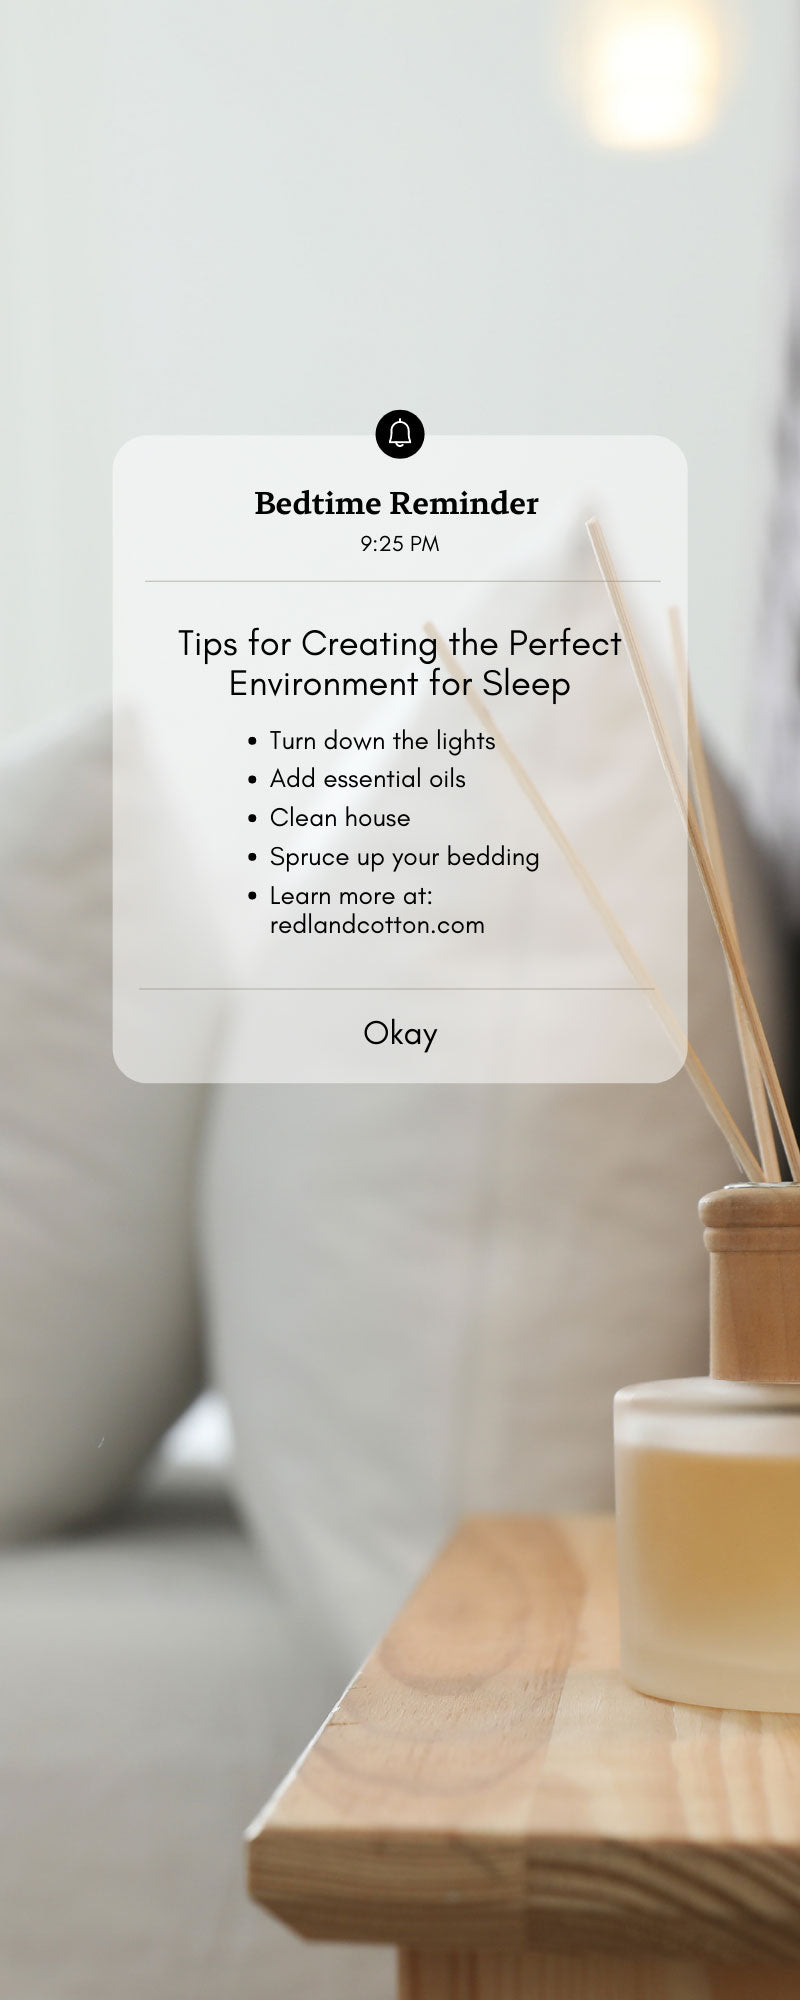 Tips for Creating the Perfect Environment for Sleep